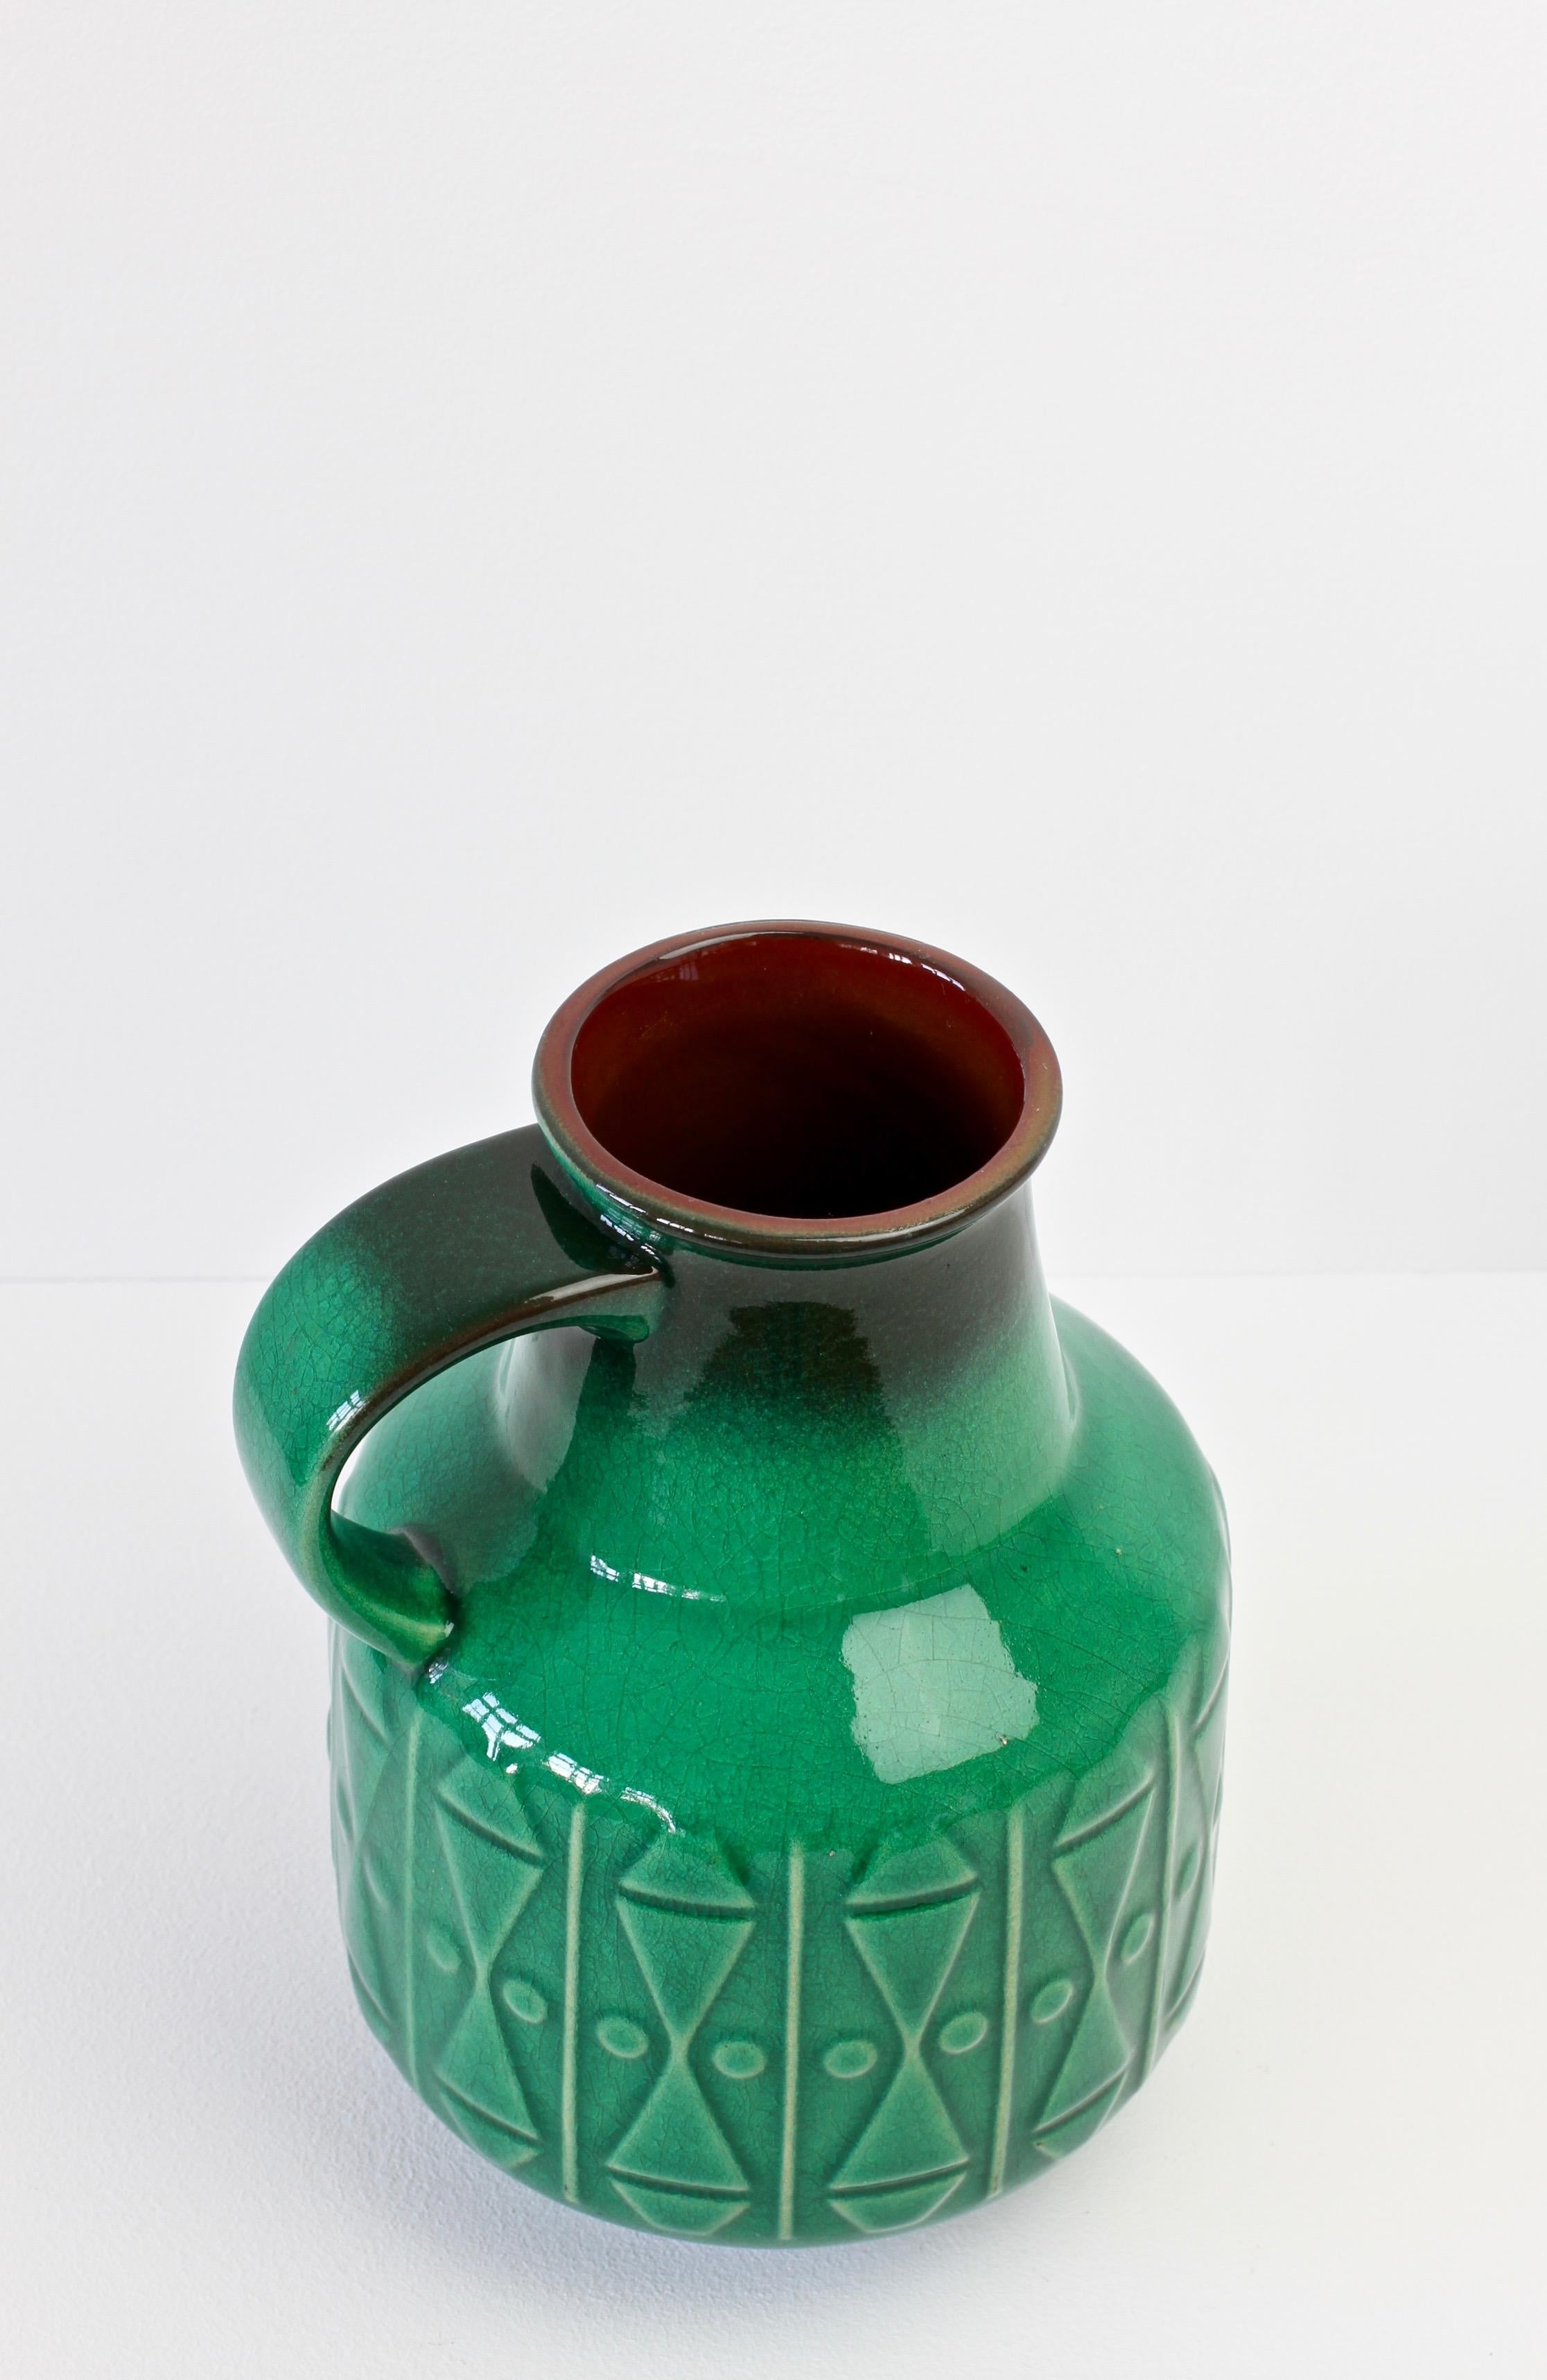 Green vase with modernist design by Graflich Pottery, Germany, circa 1970. The vase with it's delightful form, emerald green crackle glaze and relief pattern, is a wonderful design statement and a fun way to add a bit of fun in to a room with this